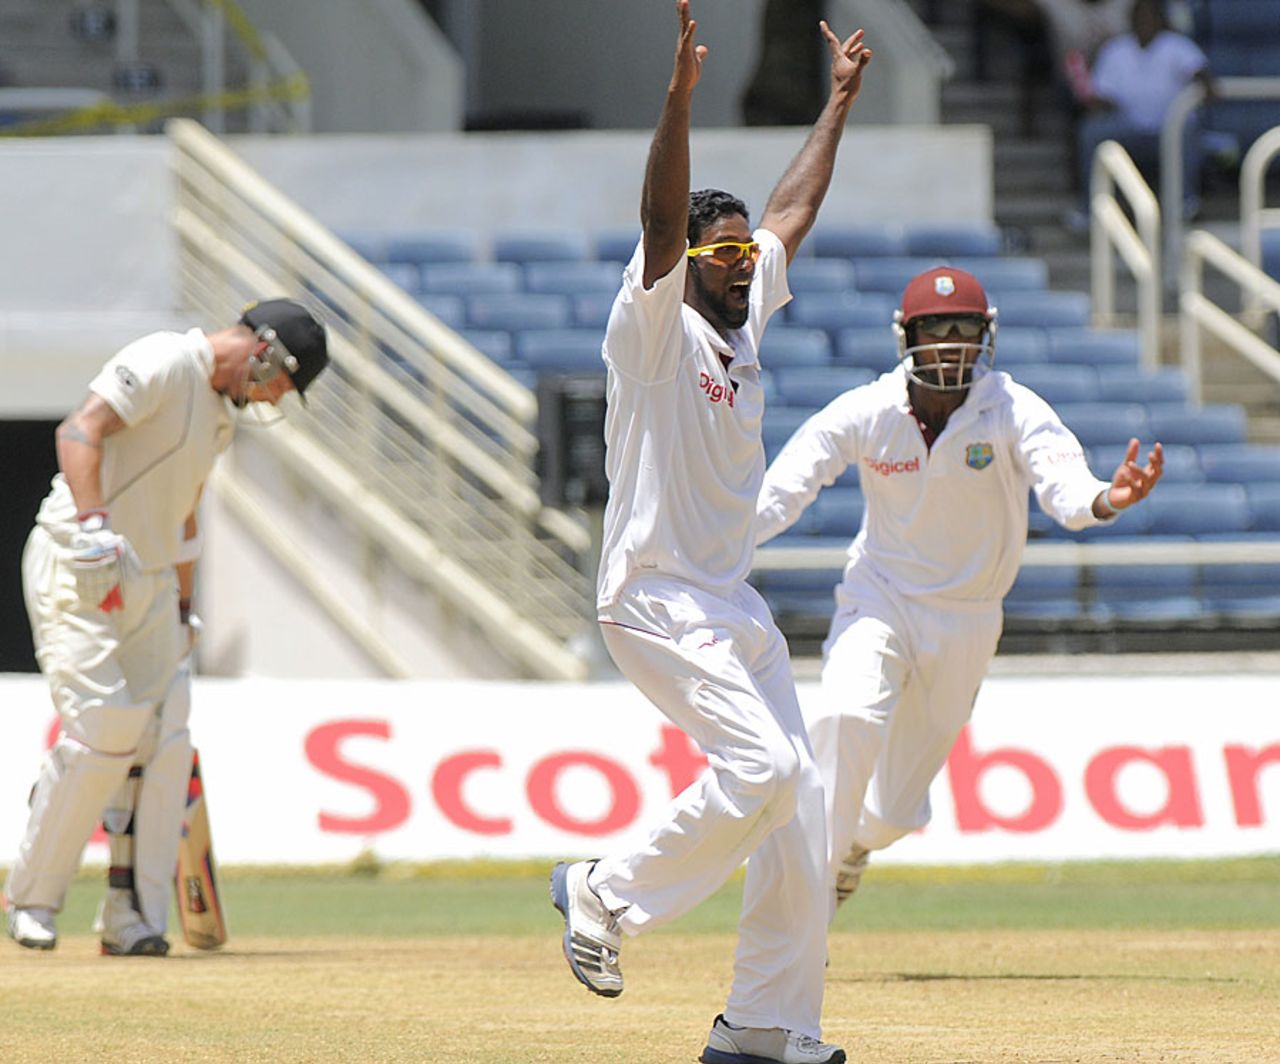 Narsingh Deonarine picked up 4 for 37, West Indies v New Zealand, 2nd Test, Jamaica, 3rd day, August 4, 2012